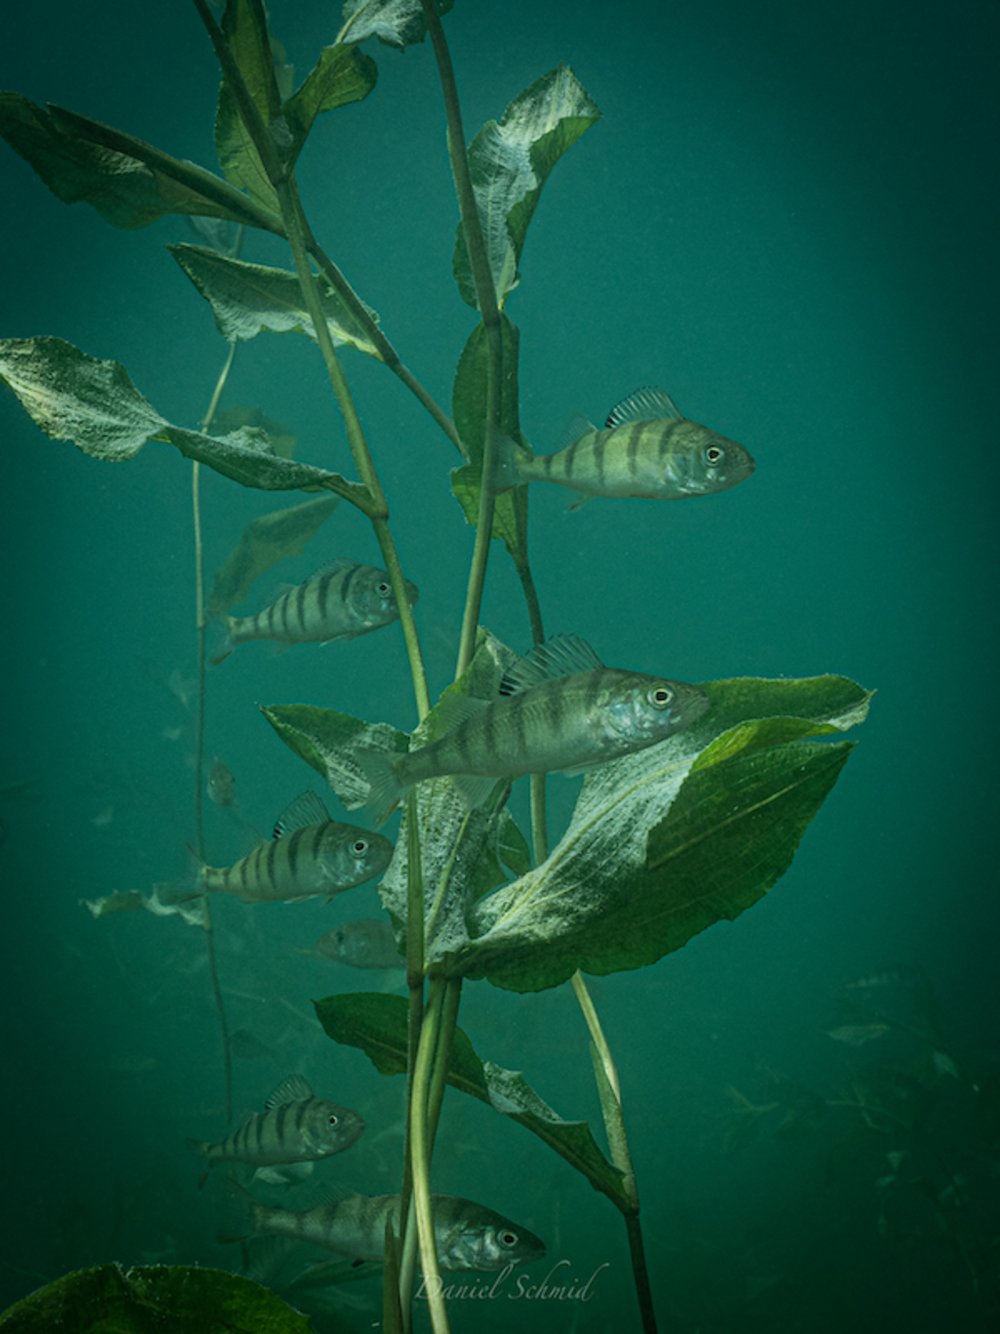 A small group of perch in beautiful green water plants